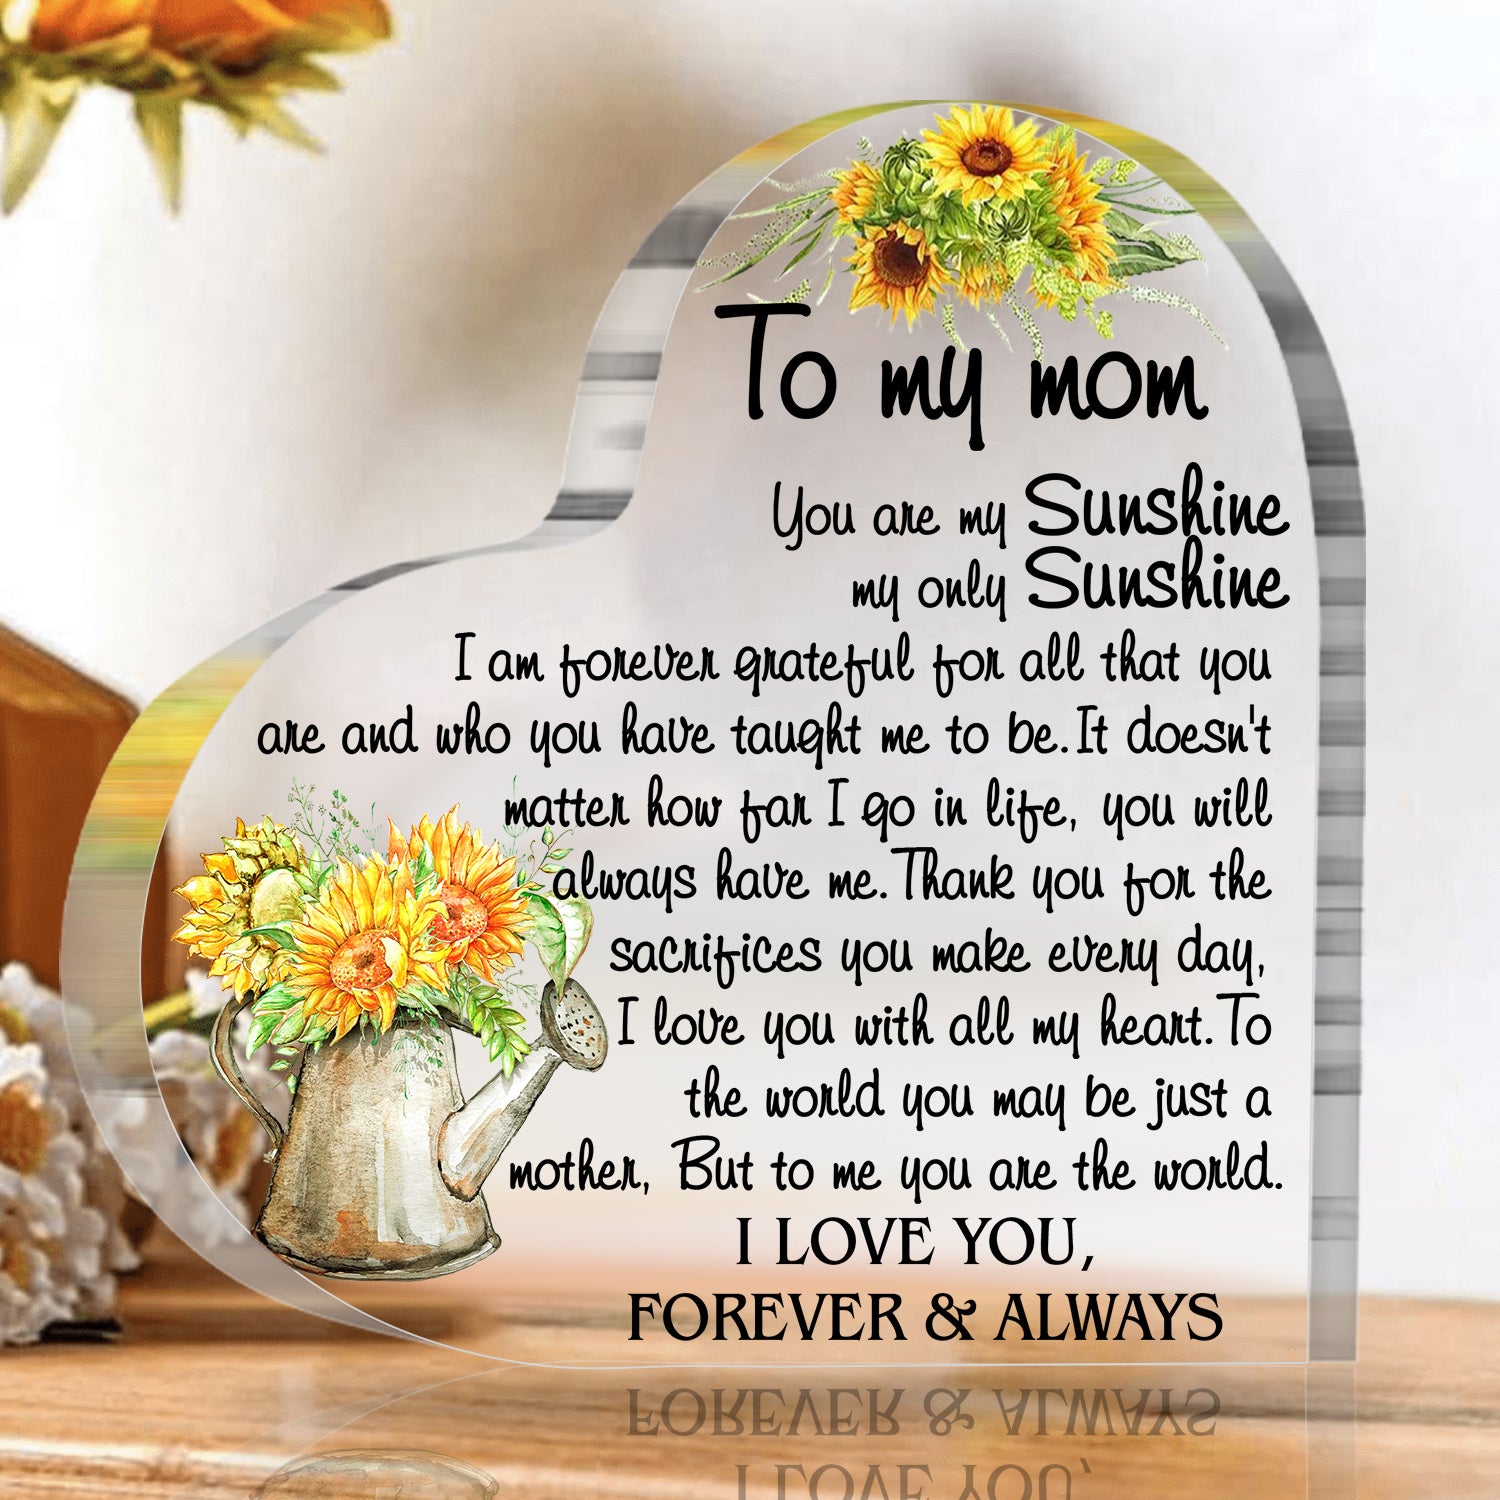 To My Mom You Are My Sunshine Heart Acrylic Plaque Mother's Day Gift Thanksgiving Birthday Gifts for Mom